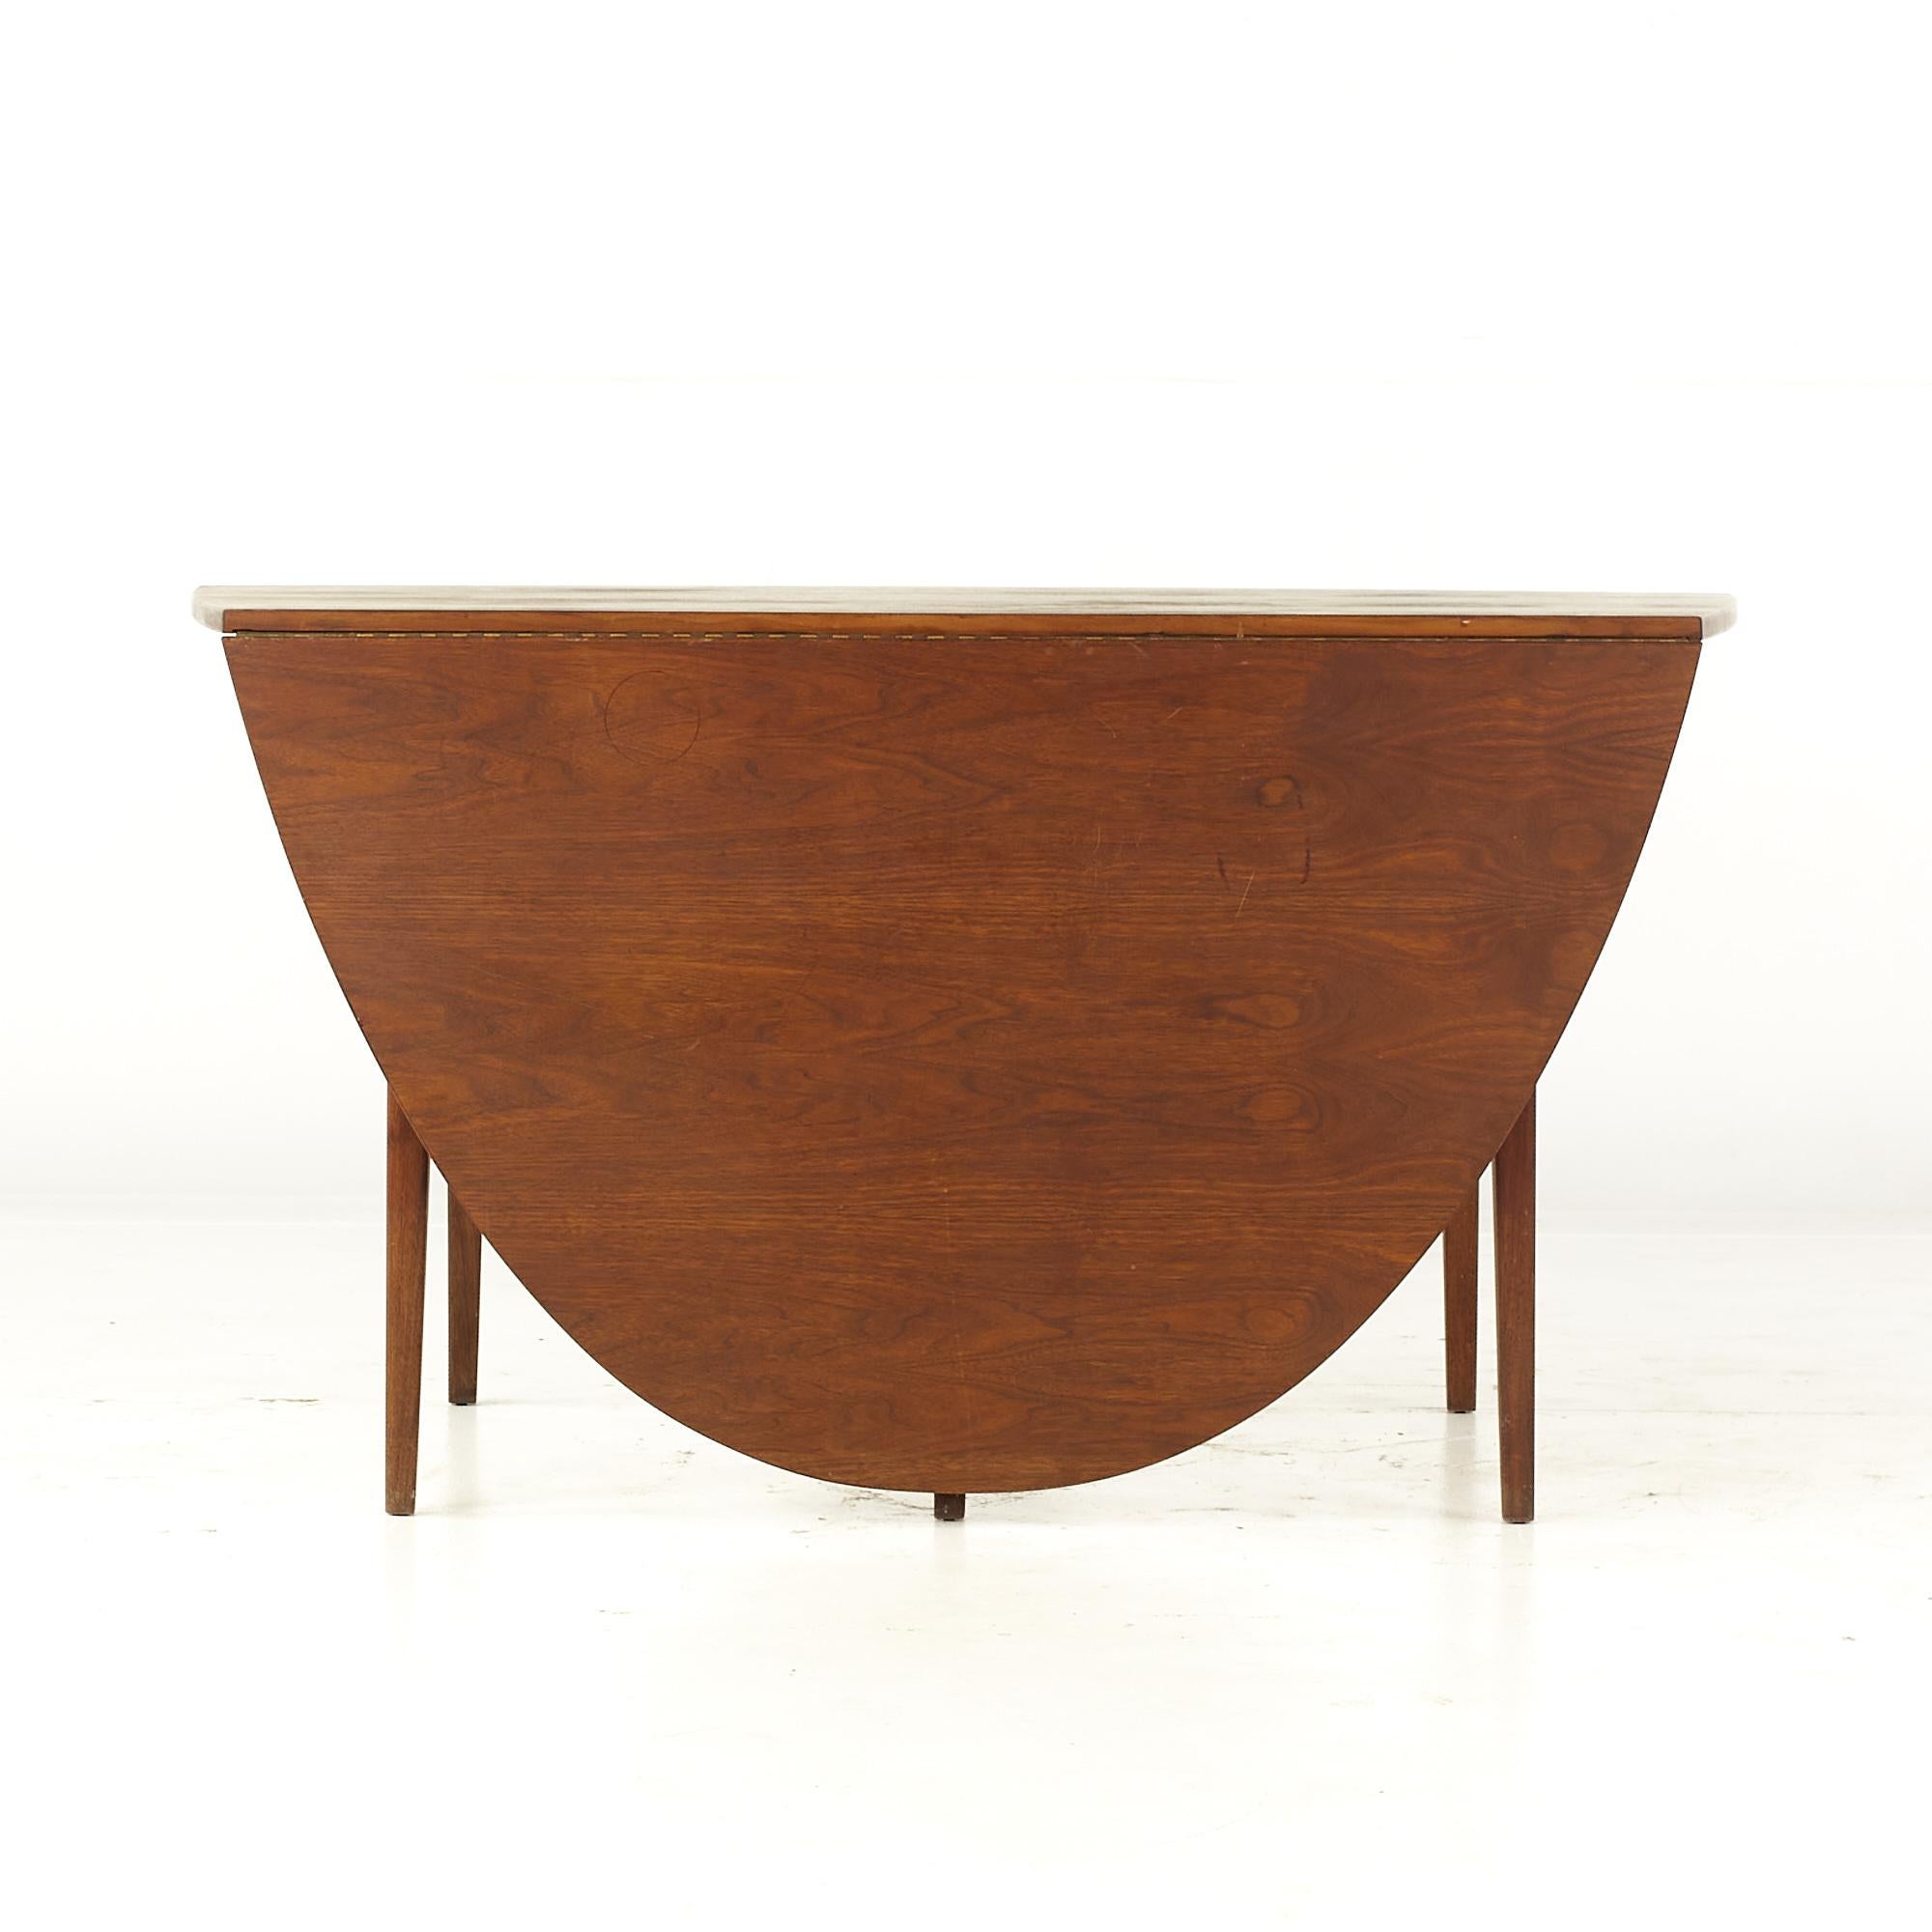 Jack Cartwright for Founders mid century walnut drop leaf dining table

This table measures: 27.25 wide x 54.25 deep x 29 high, with a chair clearance of 24.75 inches.
This table's maximum width is 54.25 and the depth midpoint is 46.75